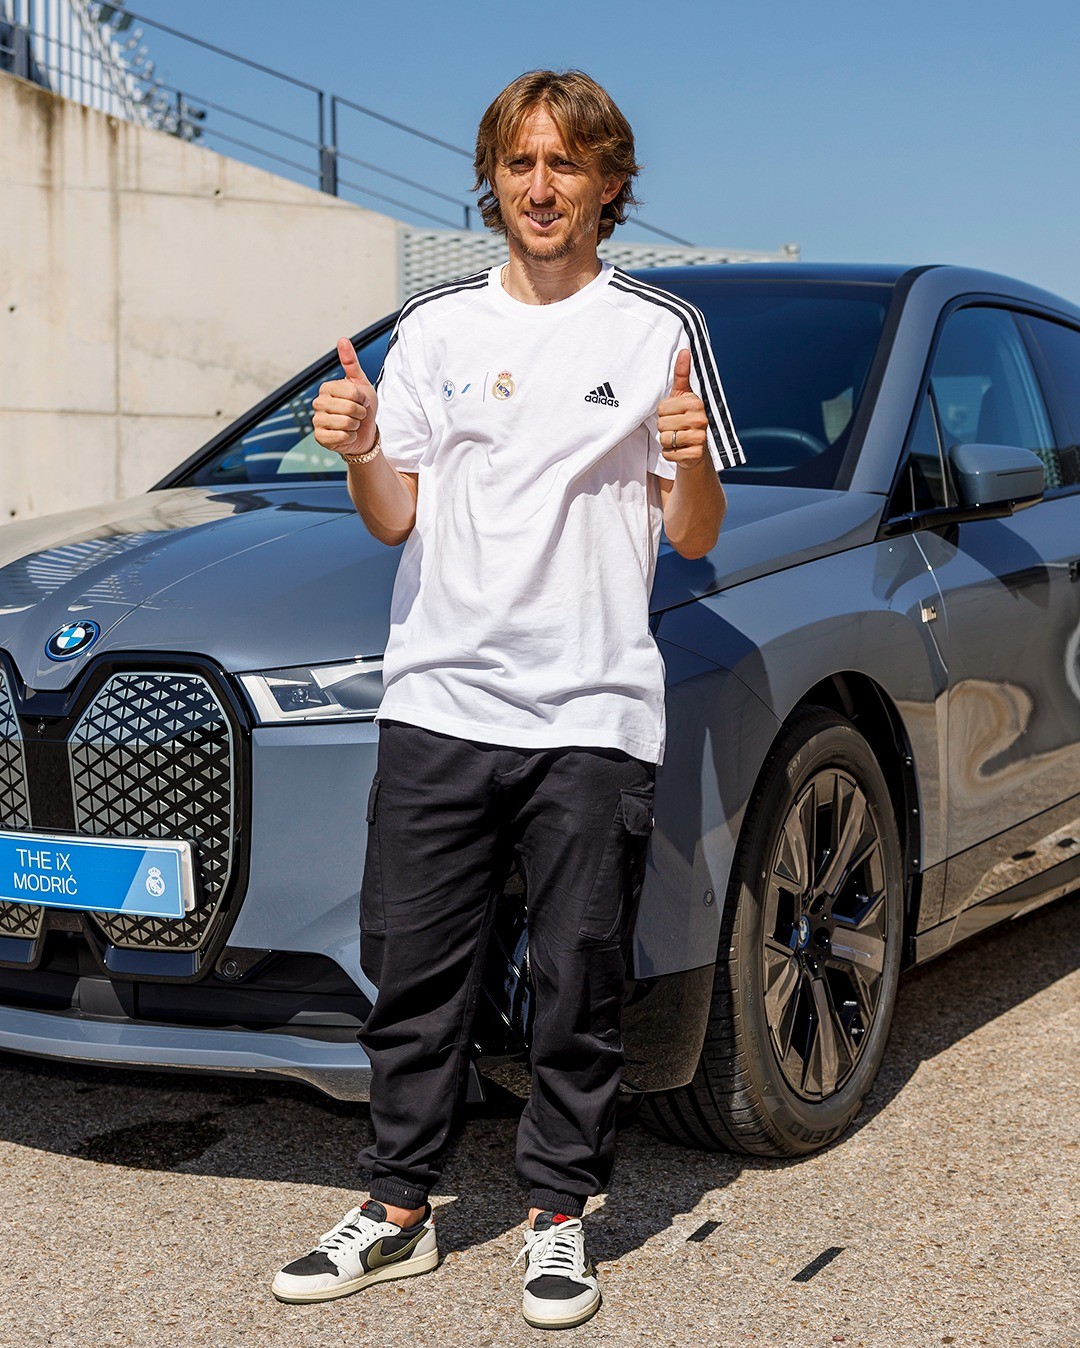 Discover Real Madrid players' new BMWs: Bellingham chooses the most  expensive car